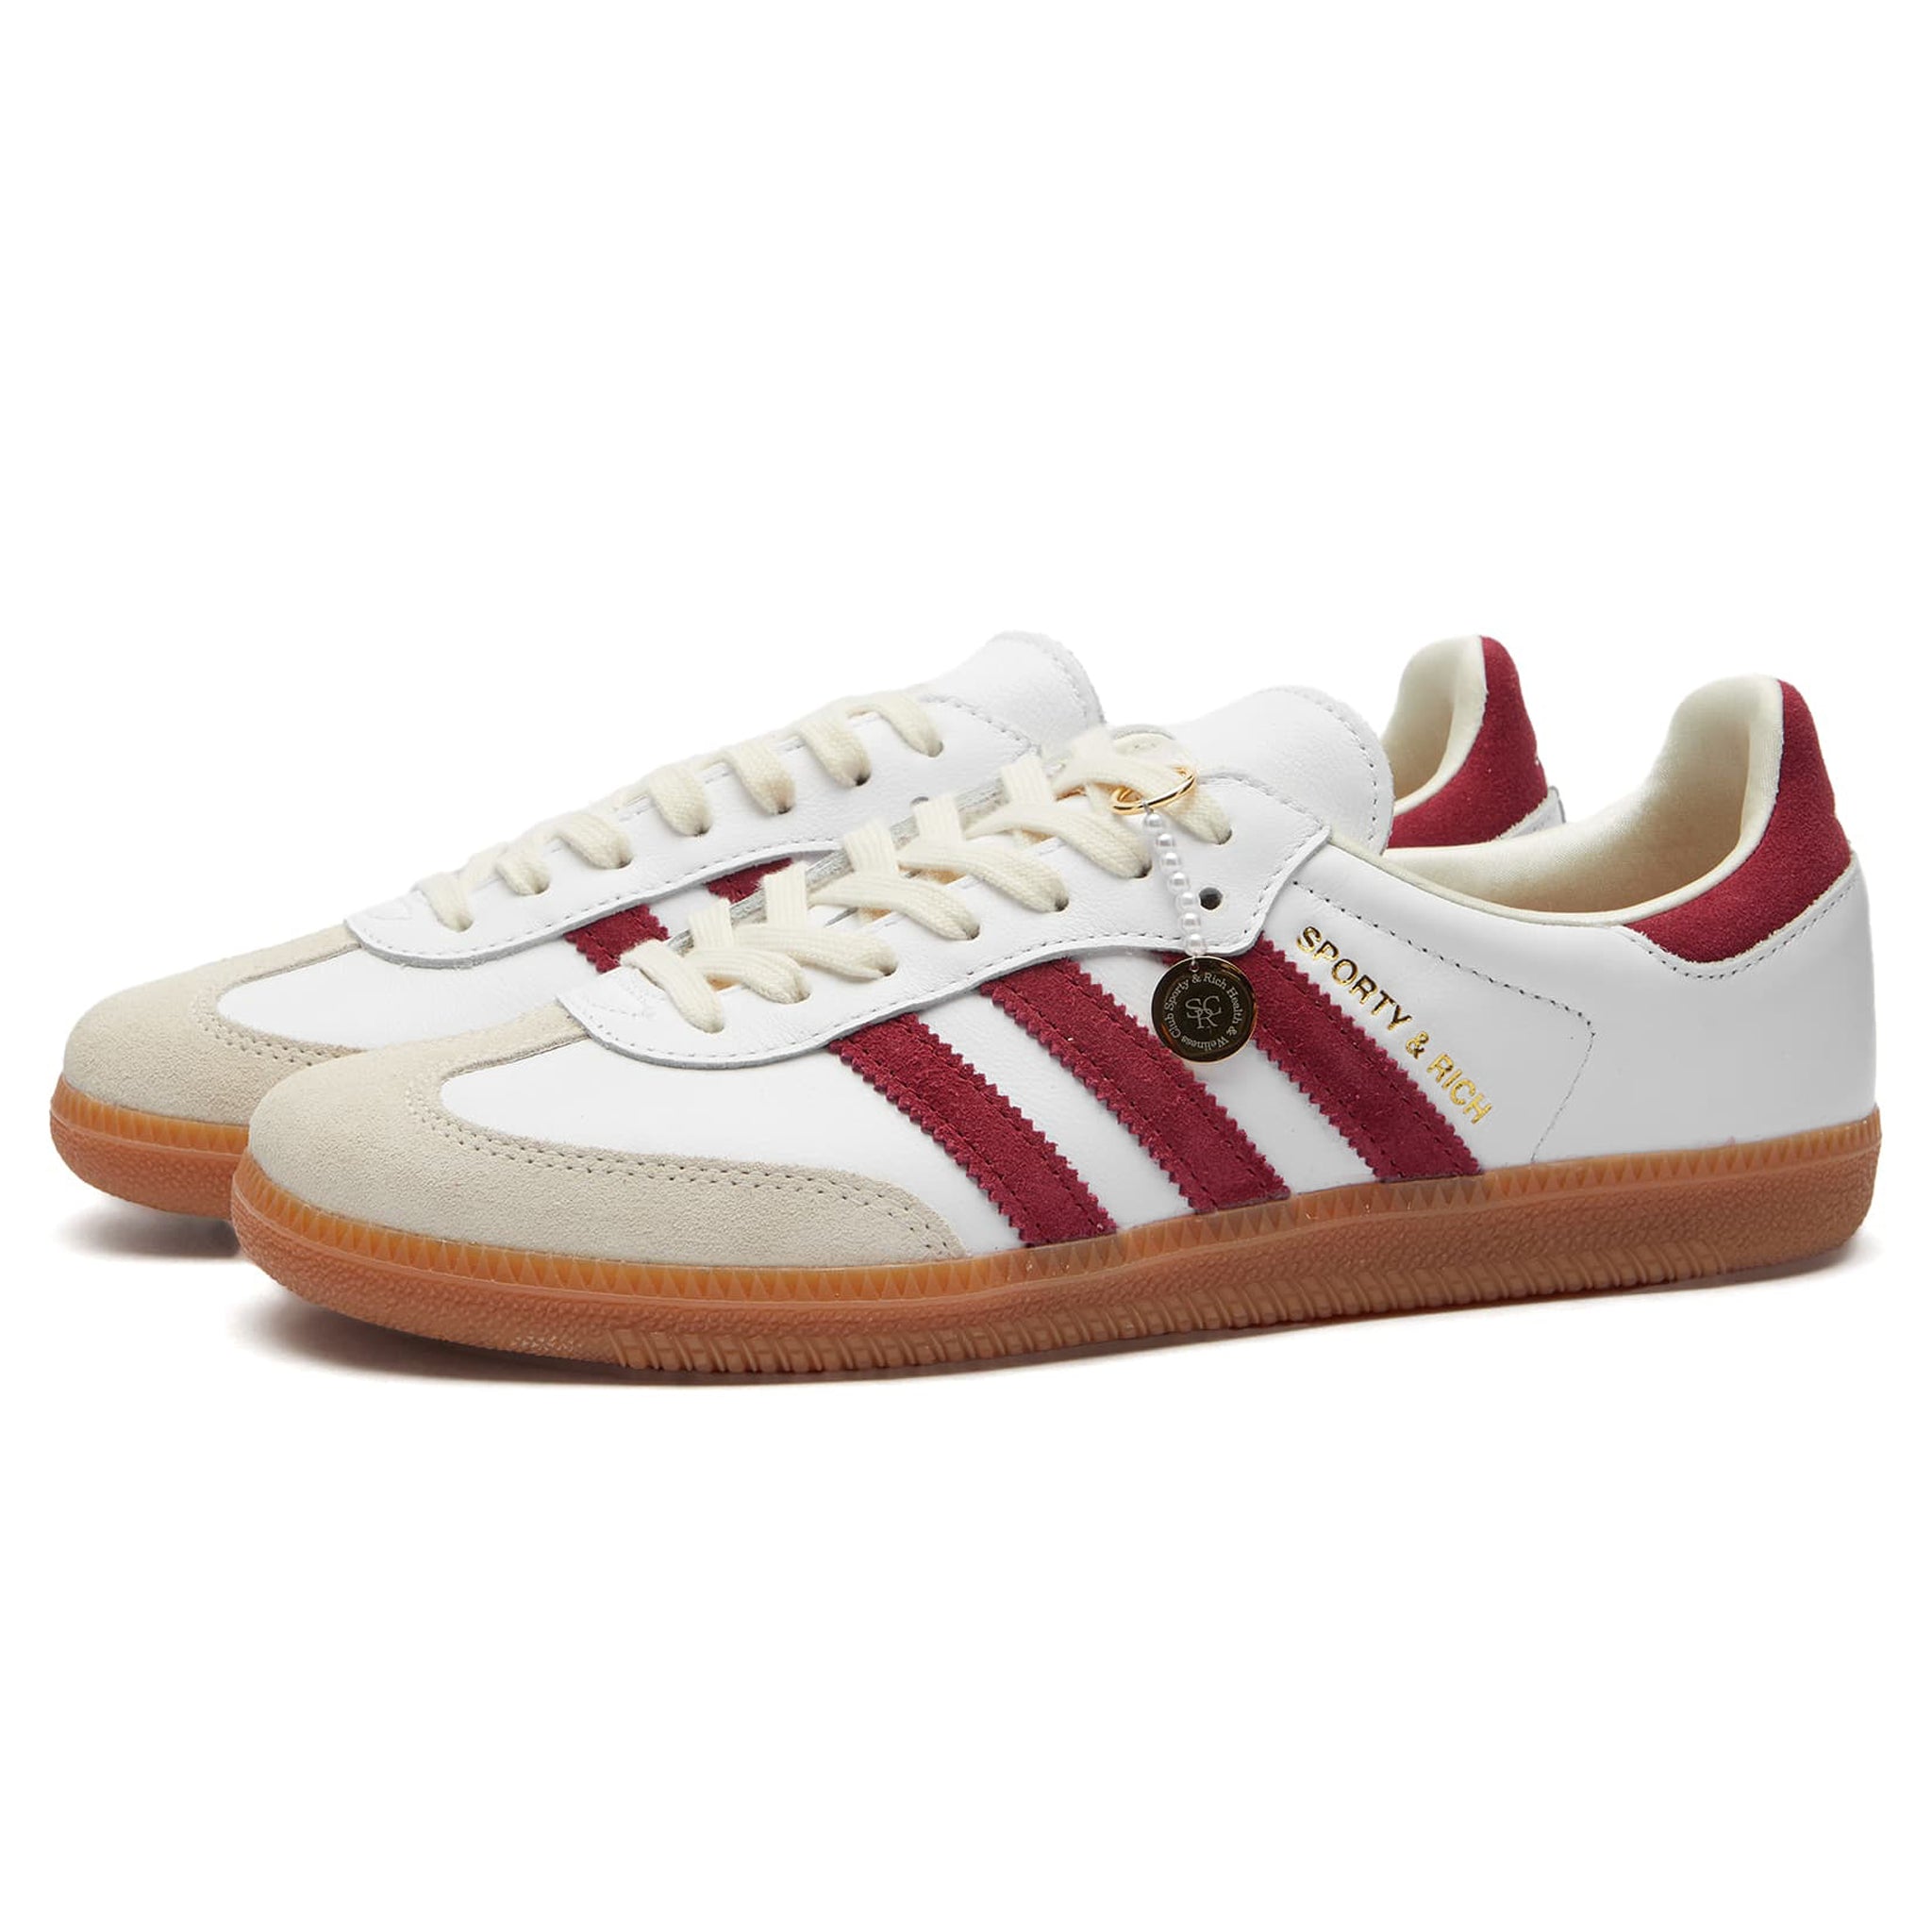 Front side view of Adidas Samba Sporty & Rich White Collegiate Burgundy IF5660